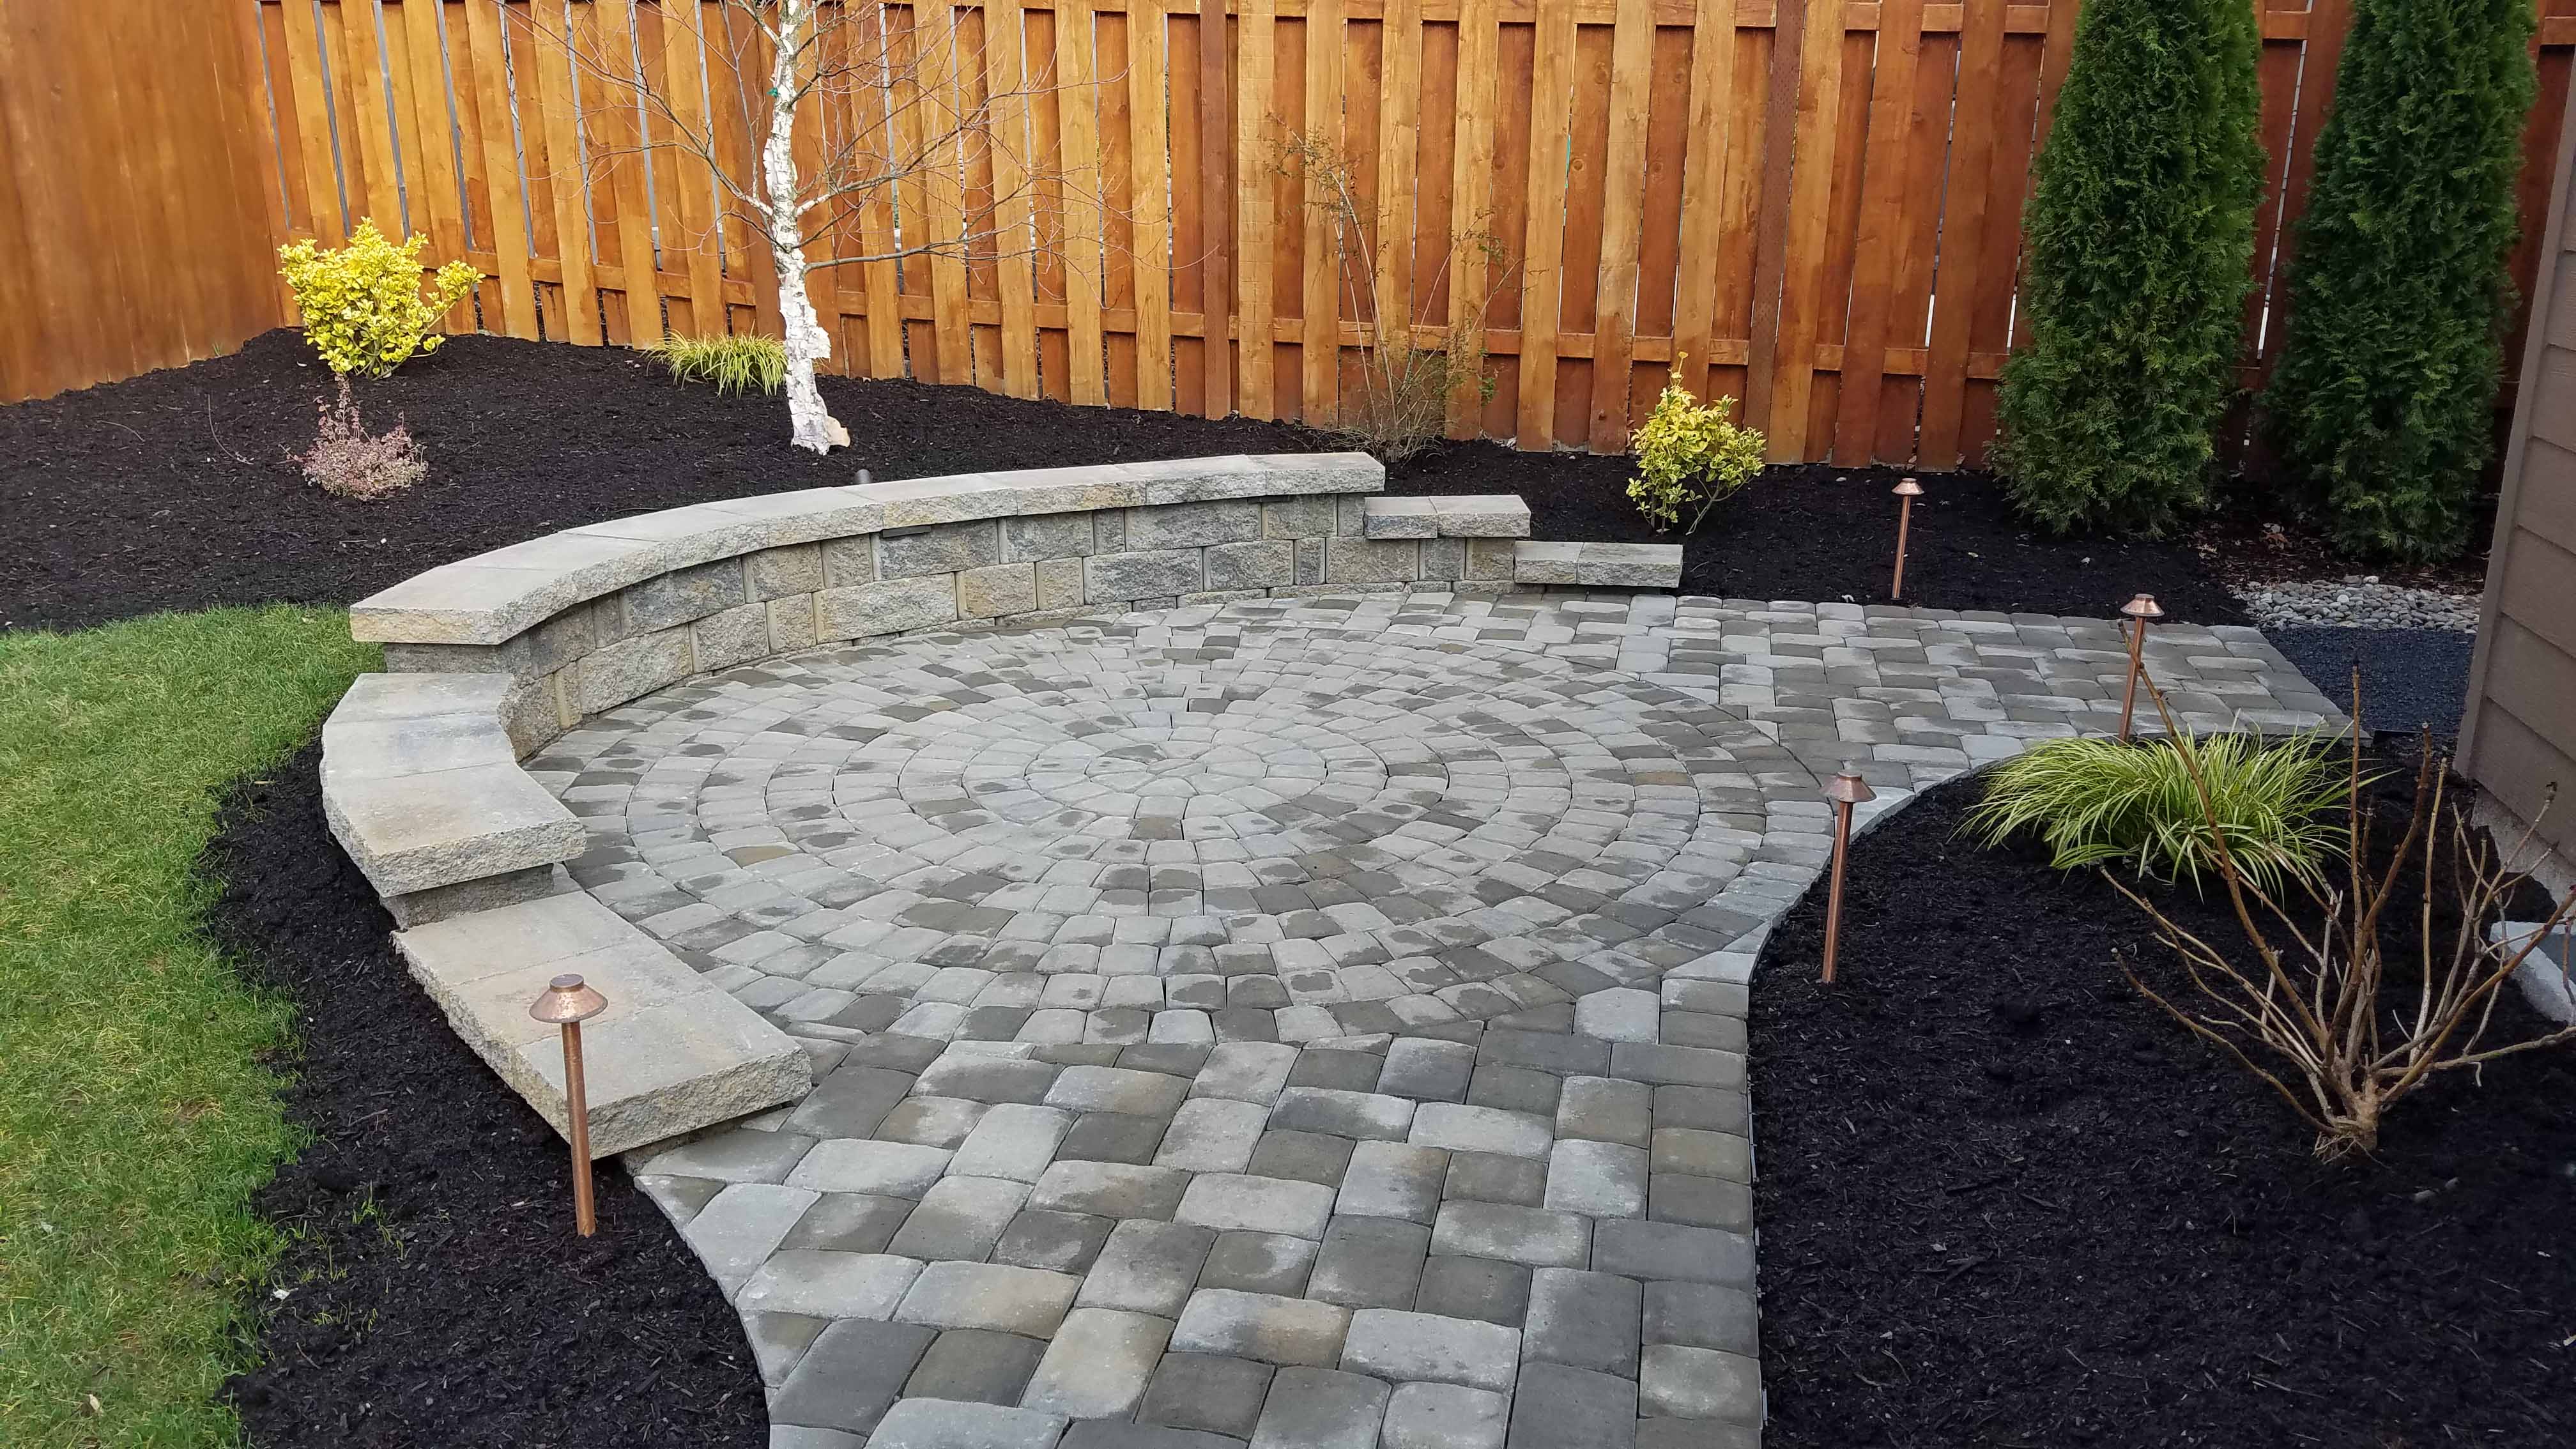 Brand new path and patio section with newly planted trees and plants